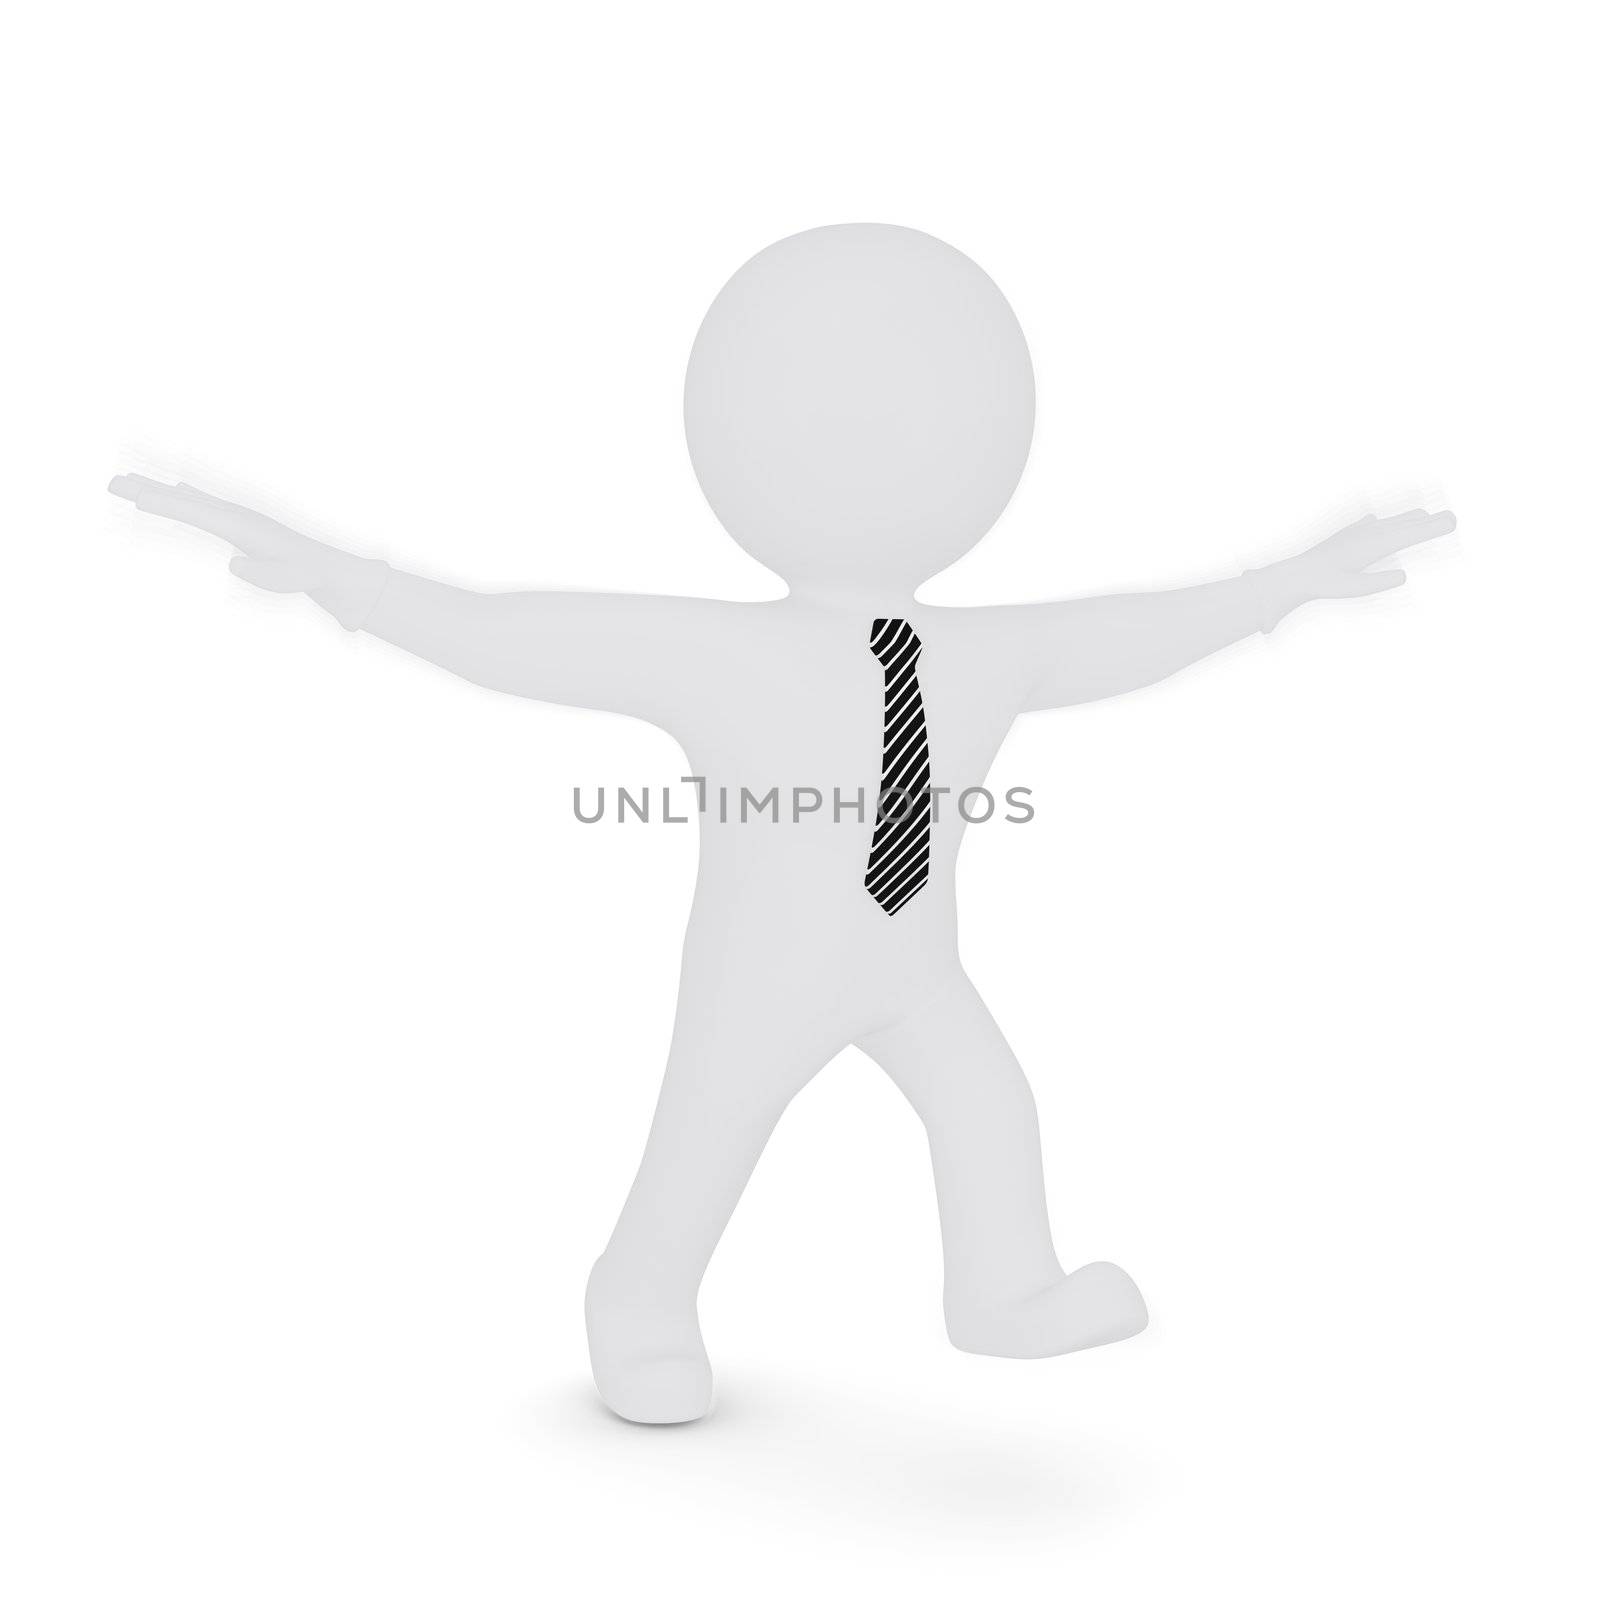 The white man ran waving his arms like a bird. Isolated on white background